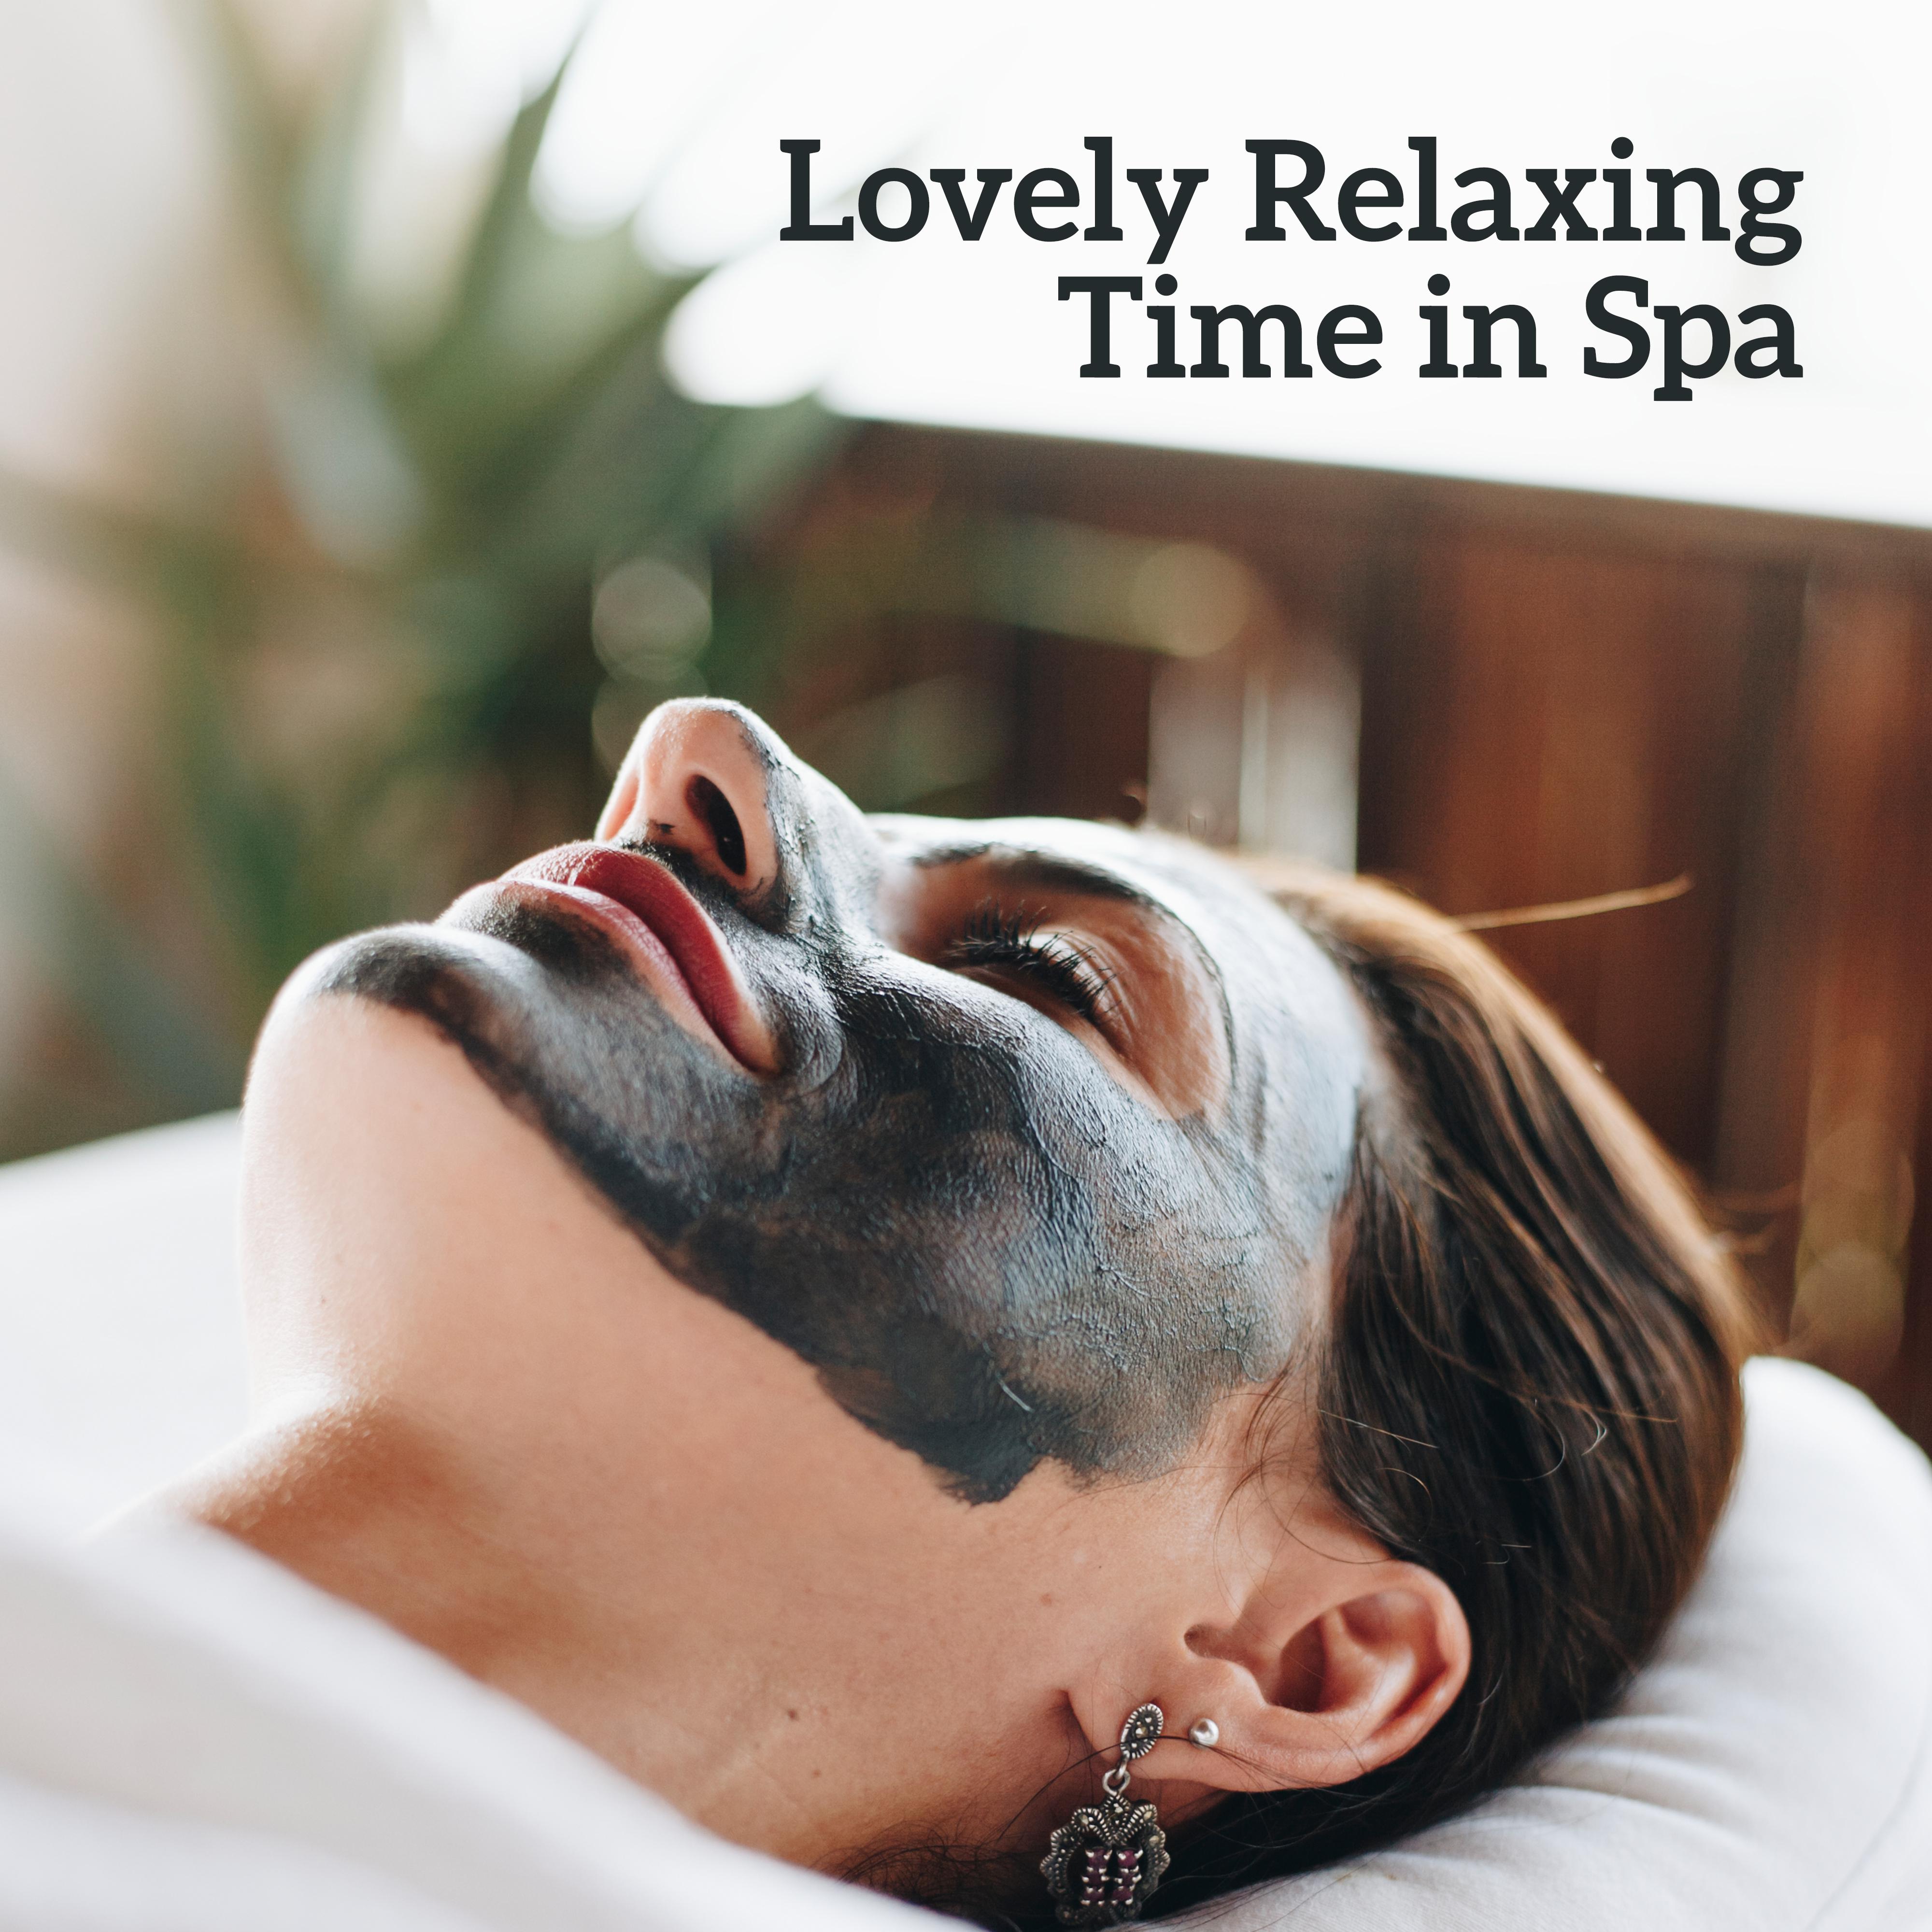 Lovely Relaxing Time in Spa – Therapeutic Background New Age Music for Perfect Massage & Wellness Experience